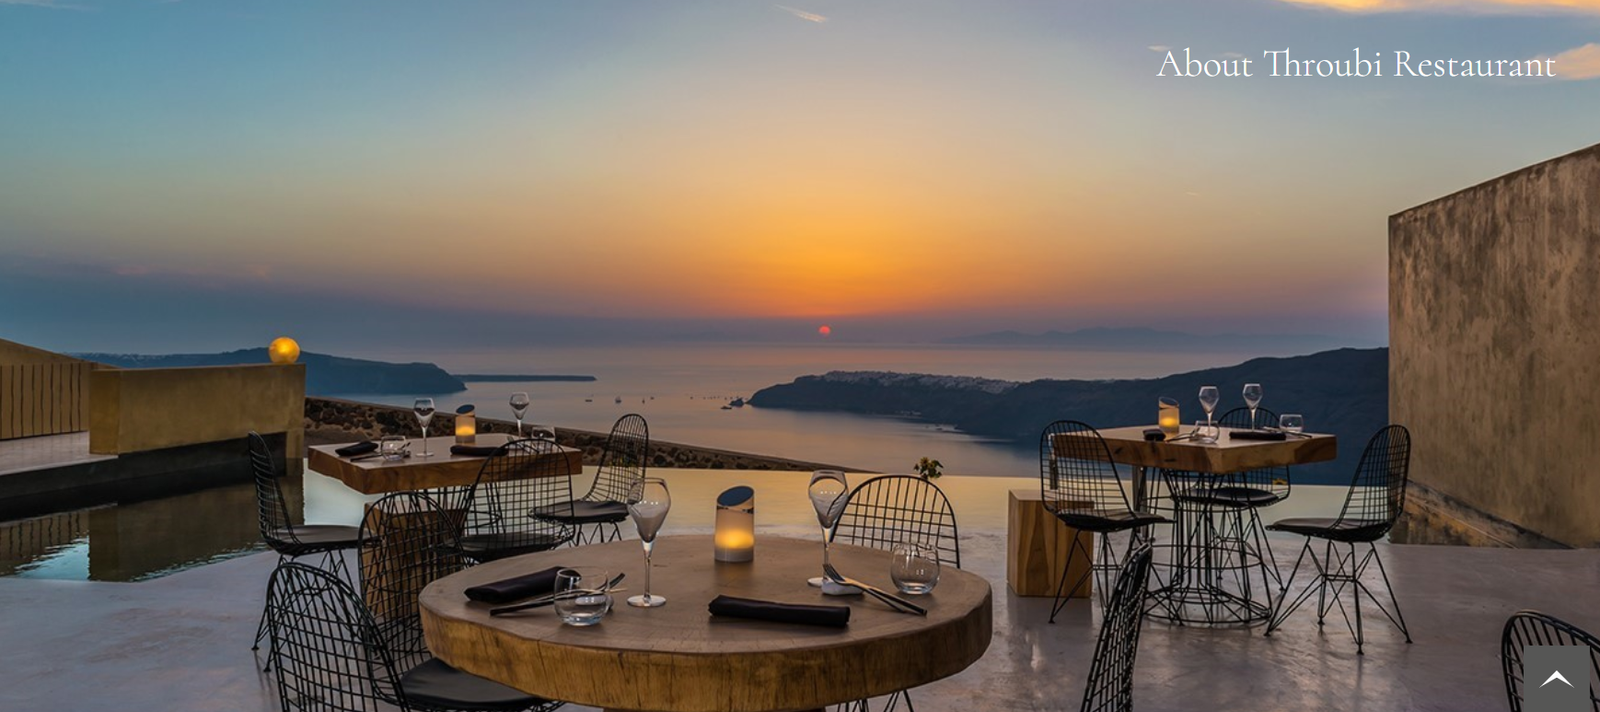 Welcome to Throubi Restaurant Celebrate fine dining at Santorini with sunset view